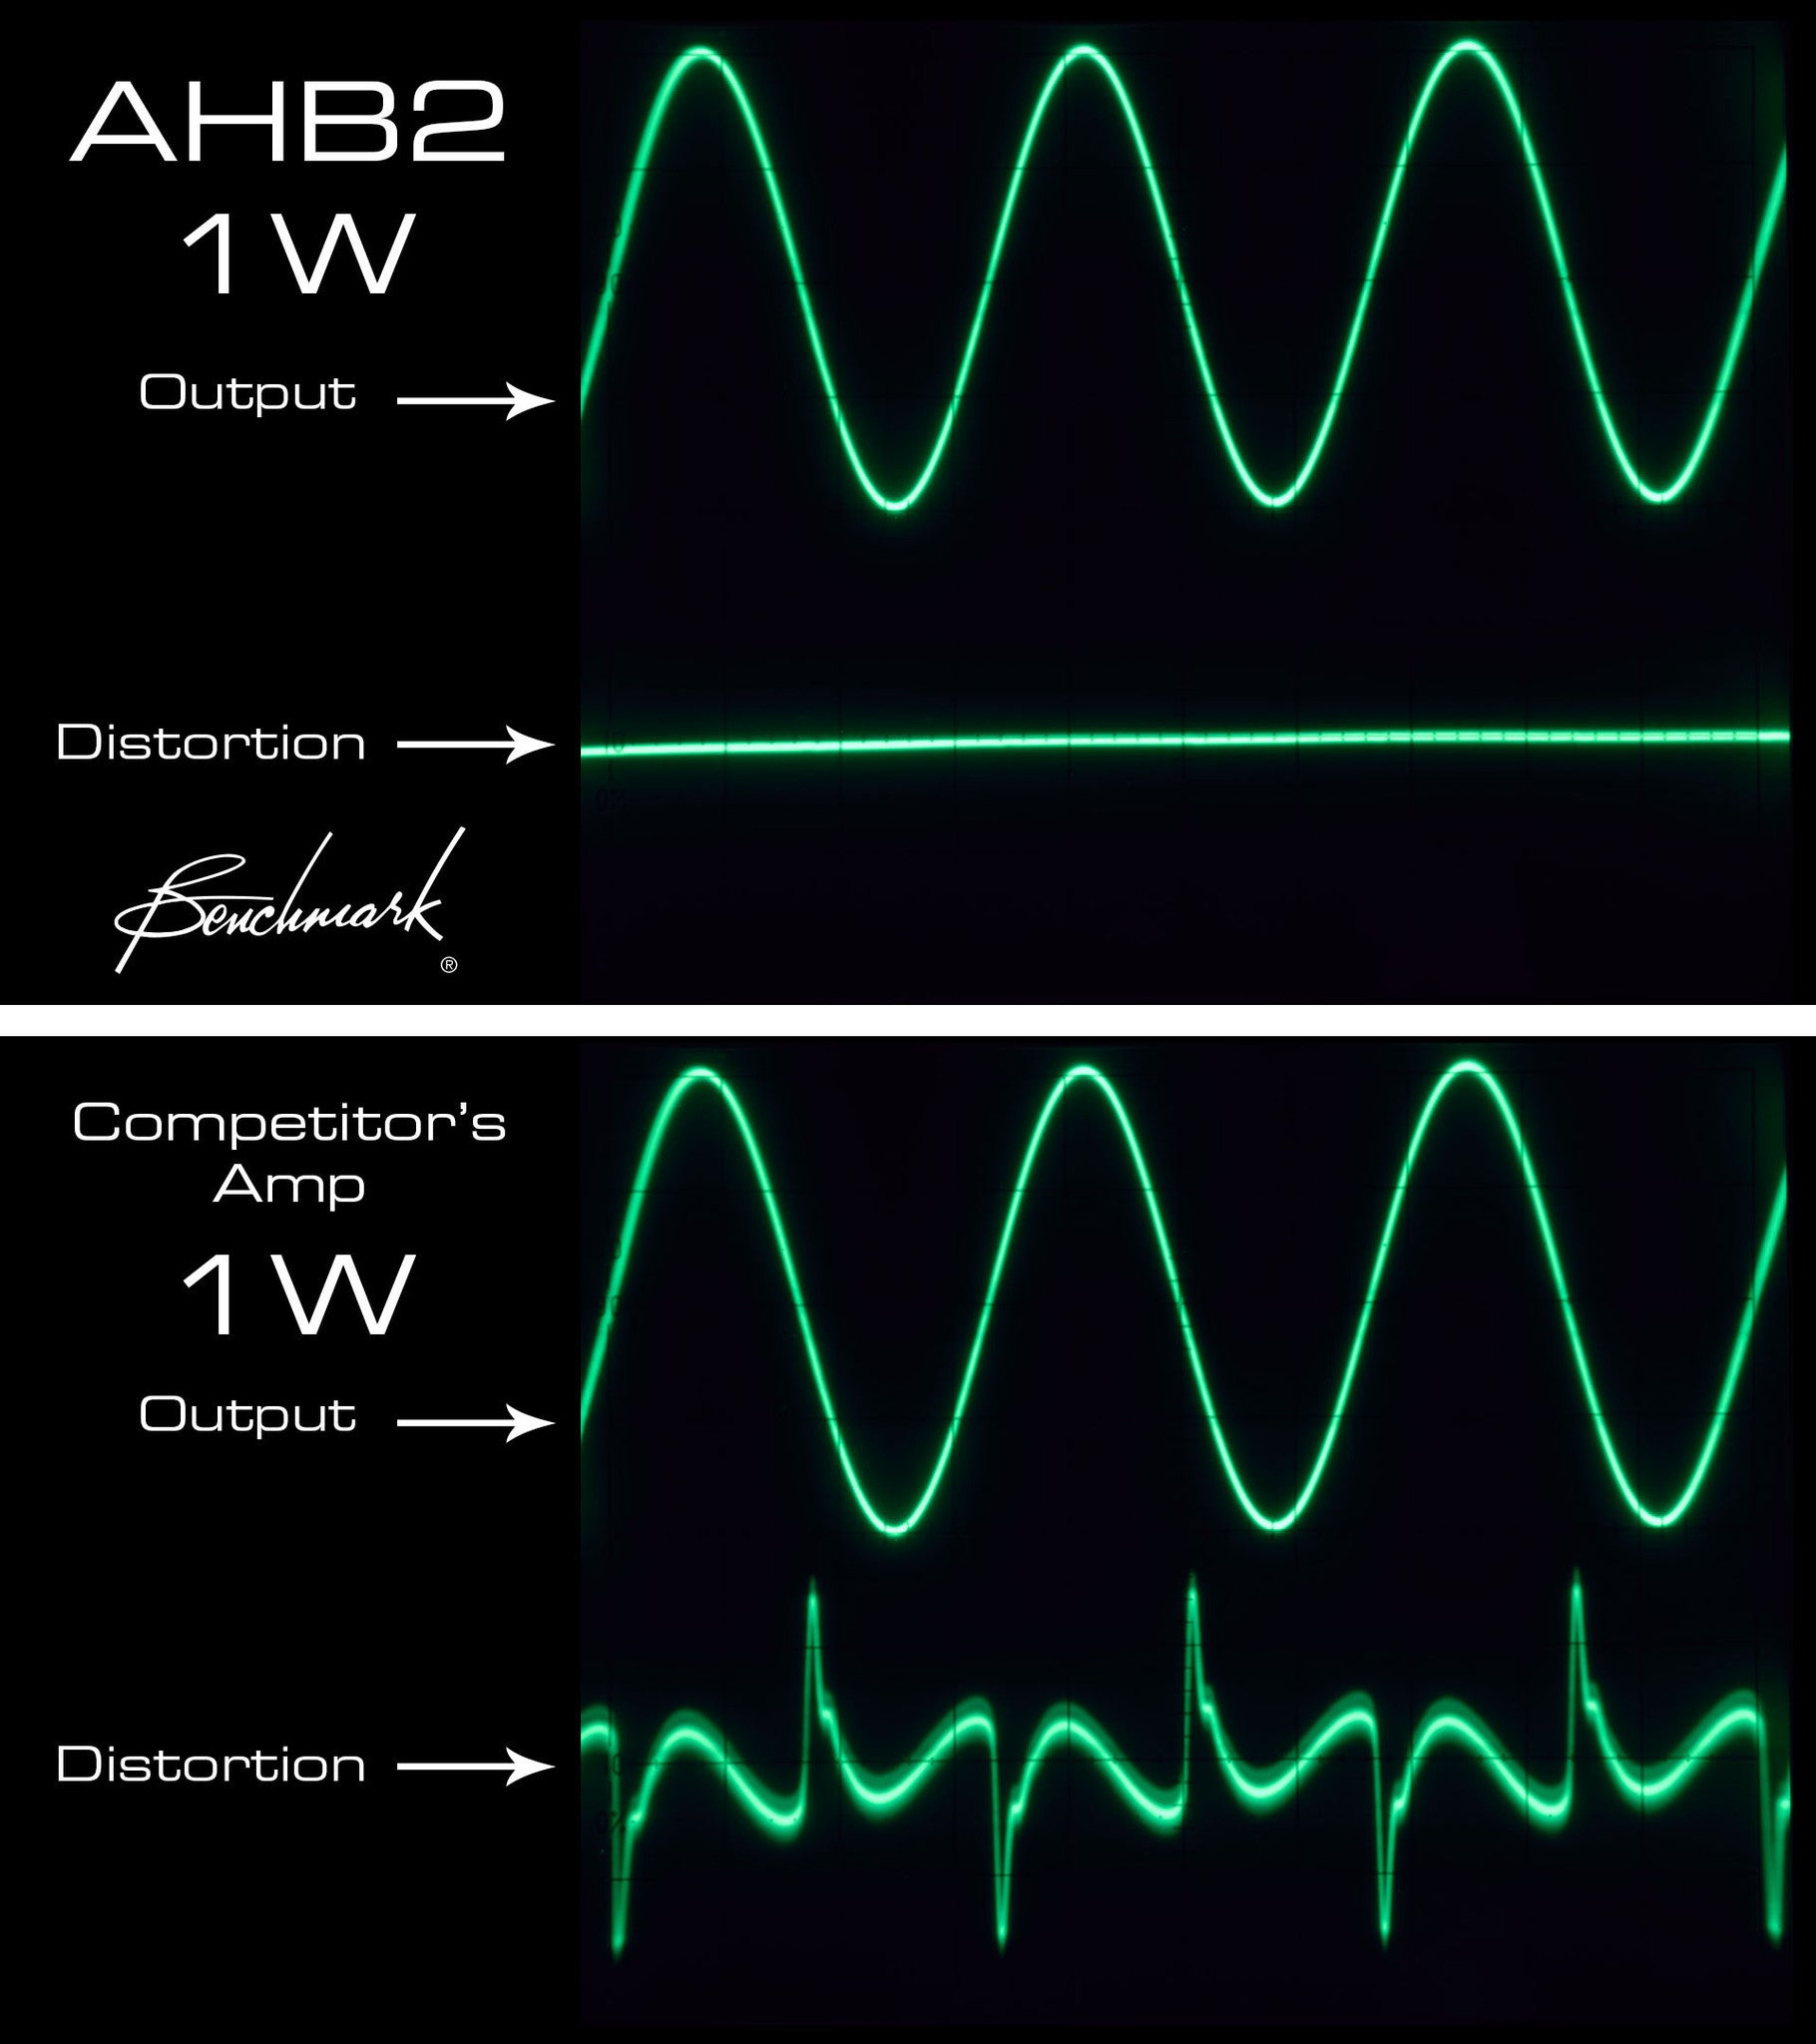 Benchmark AHB2 vs Competitor at 1 Watt - Output Waveforms